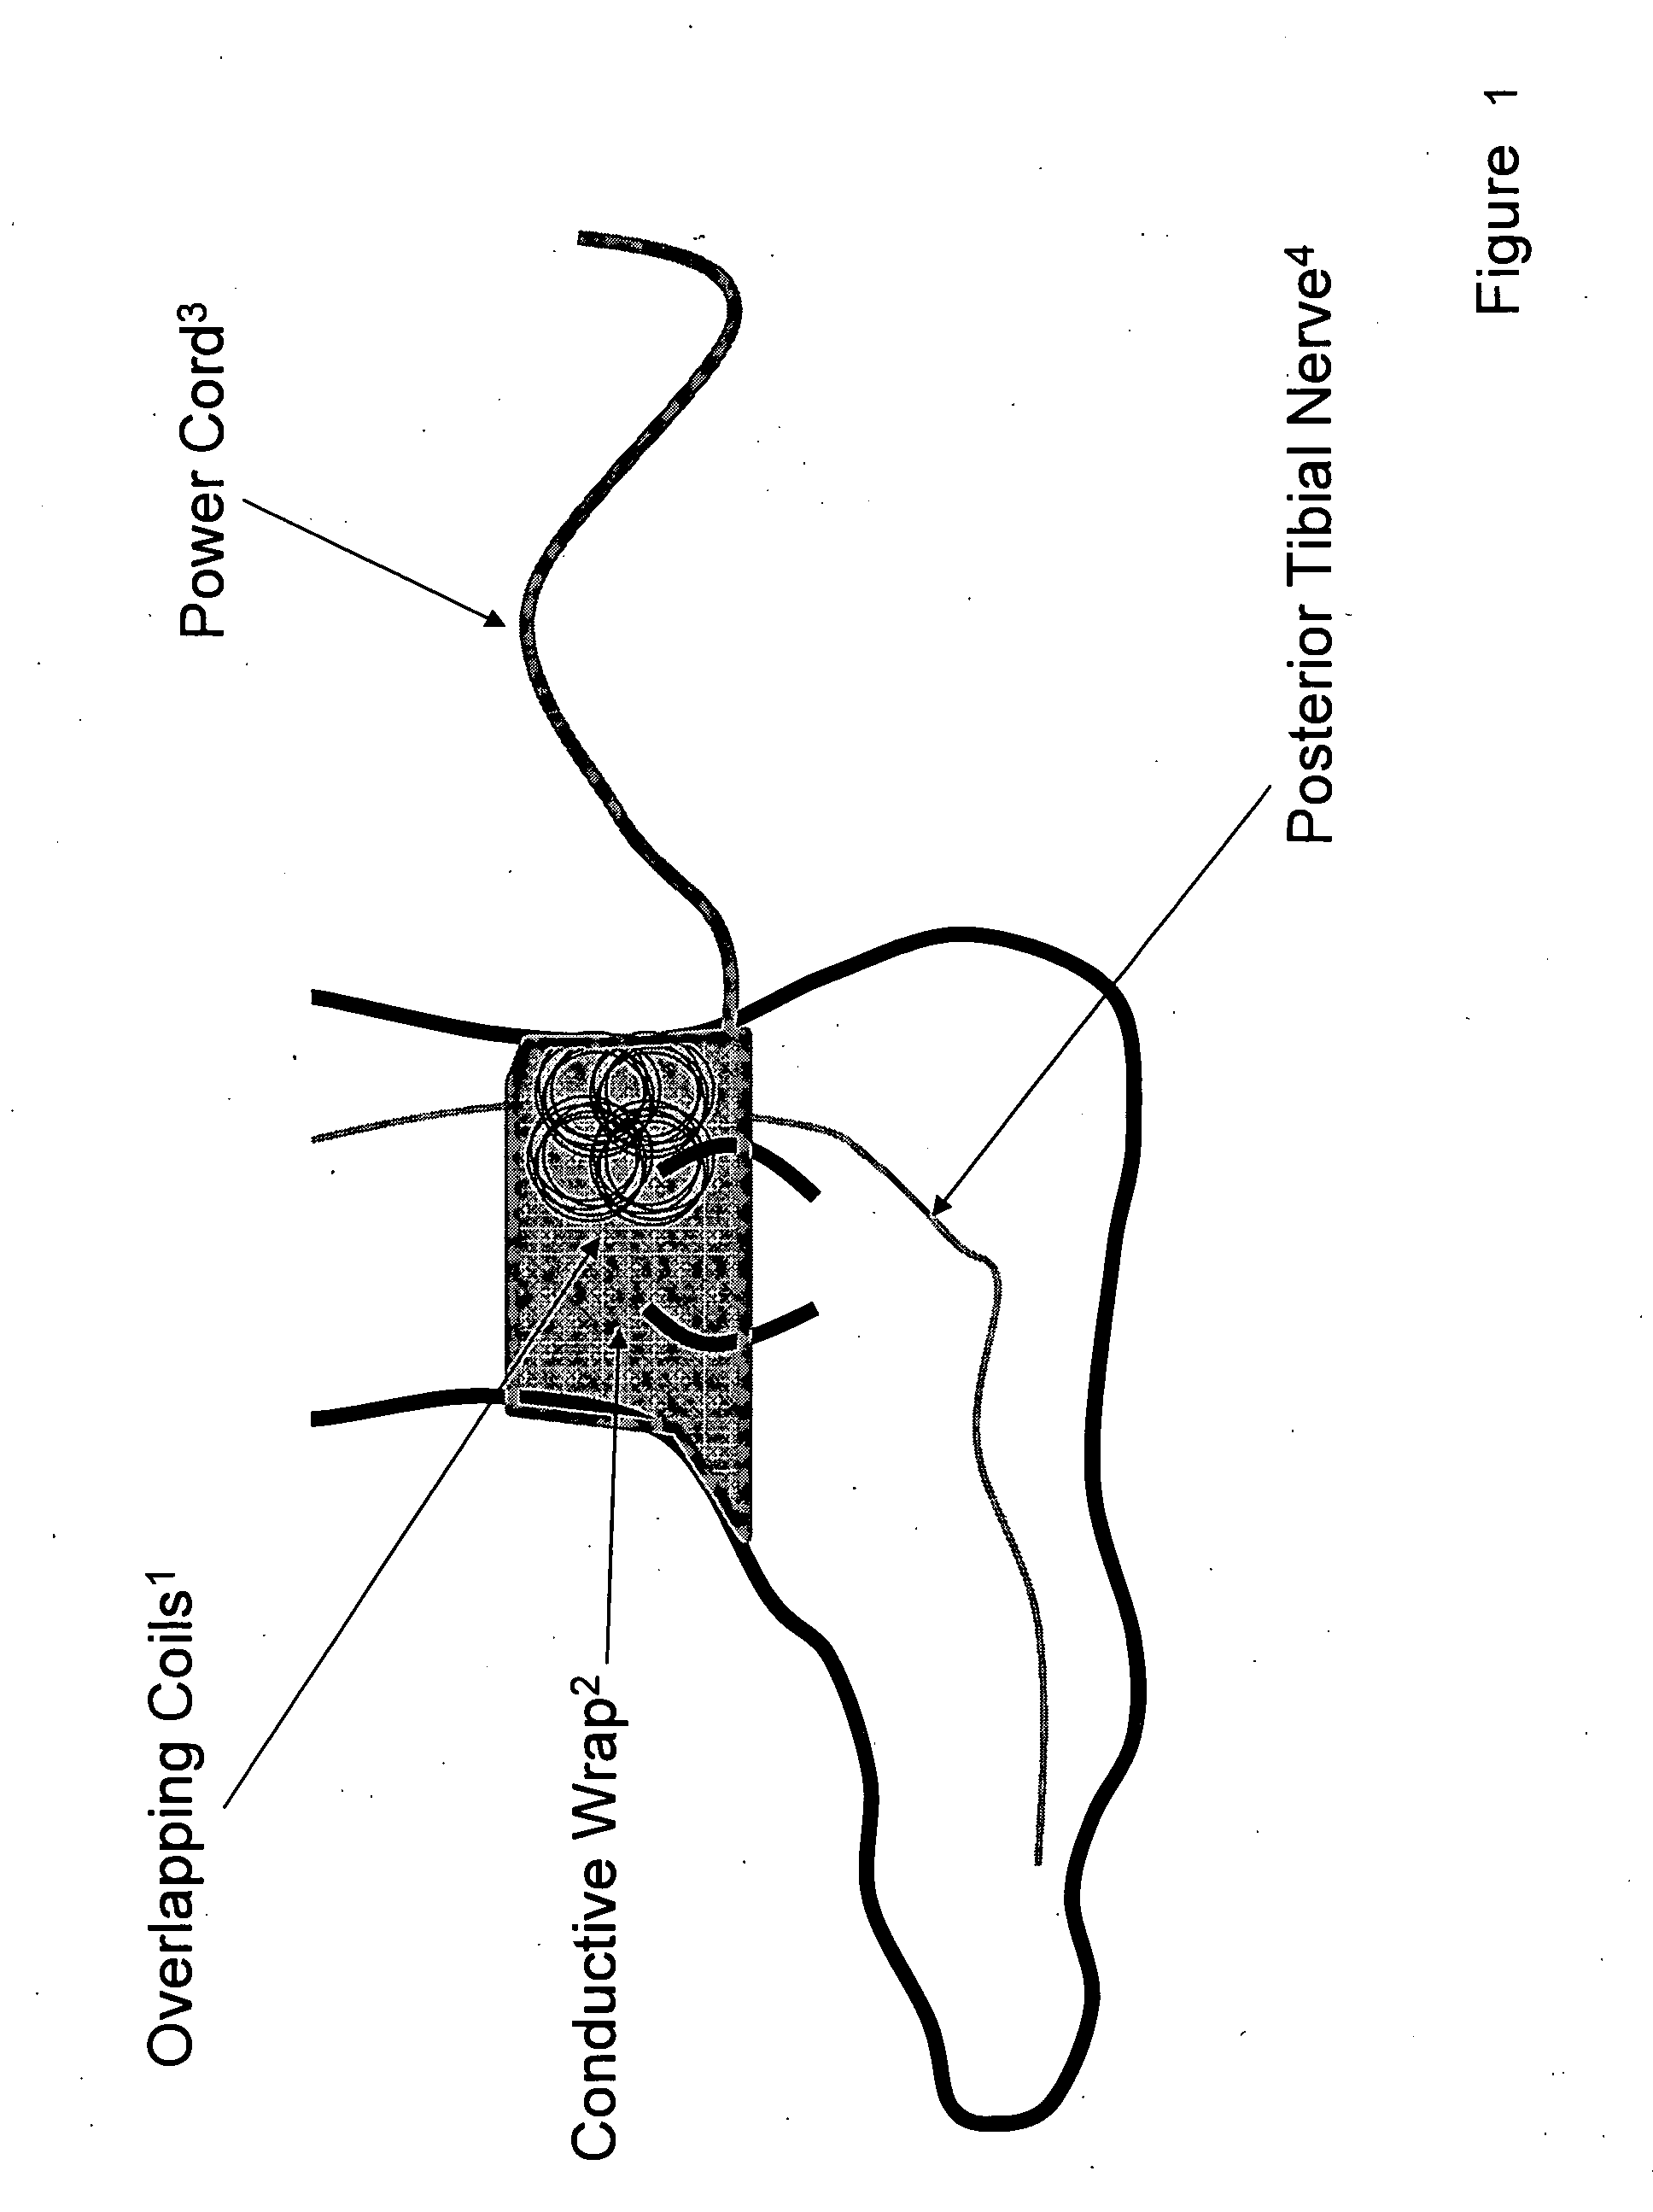 Method and apparatus for low frequency induction therapy for the treatment of urinary incontinence and overactive bladder